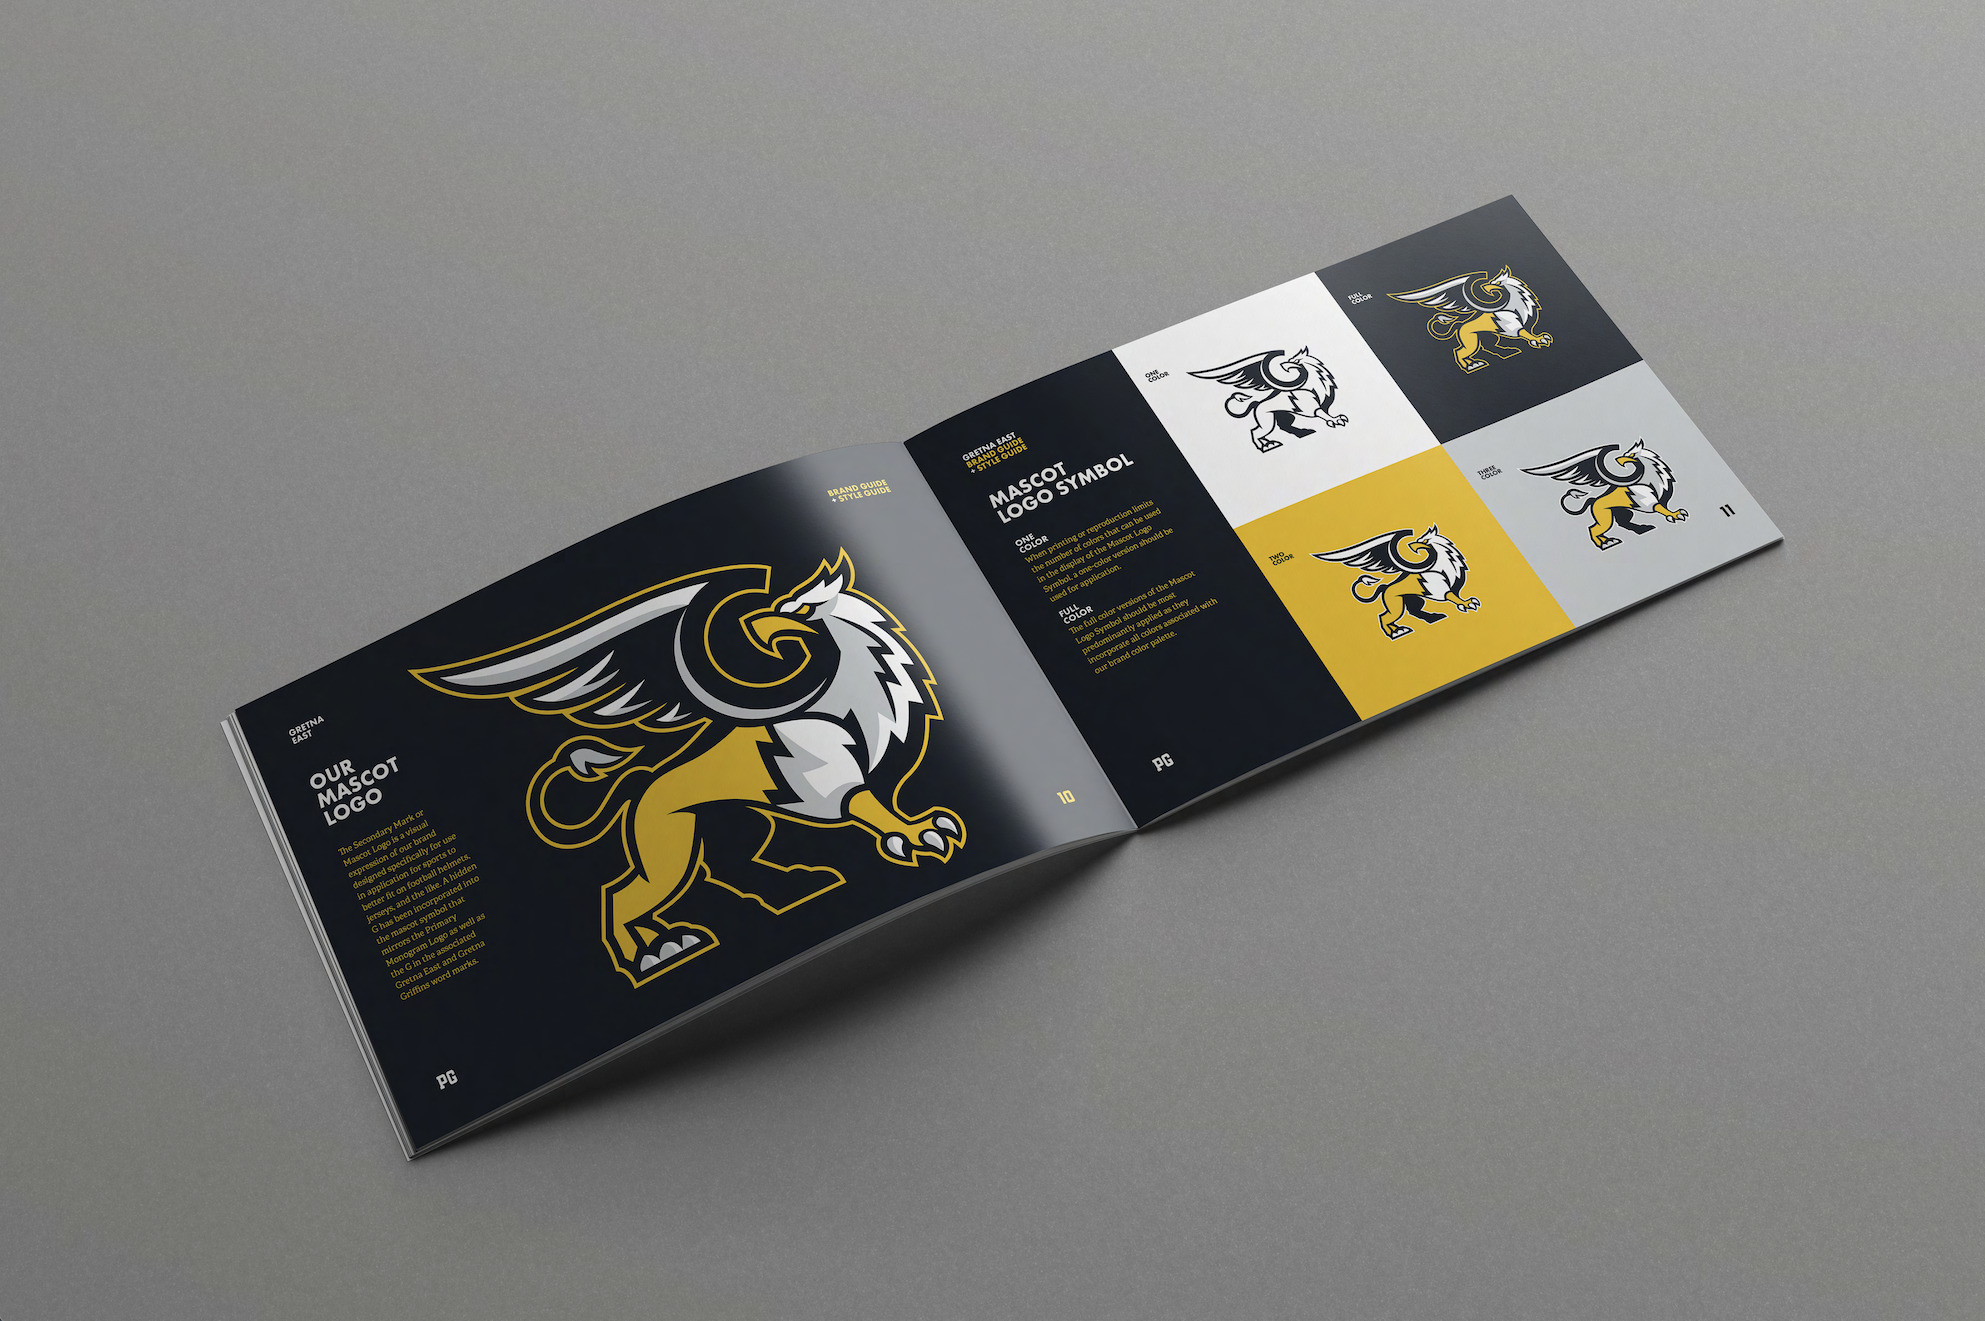 Brand book for Gretna East High School Griffins, in Nebraska. Two page spread of logo treatments and color palettes